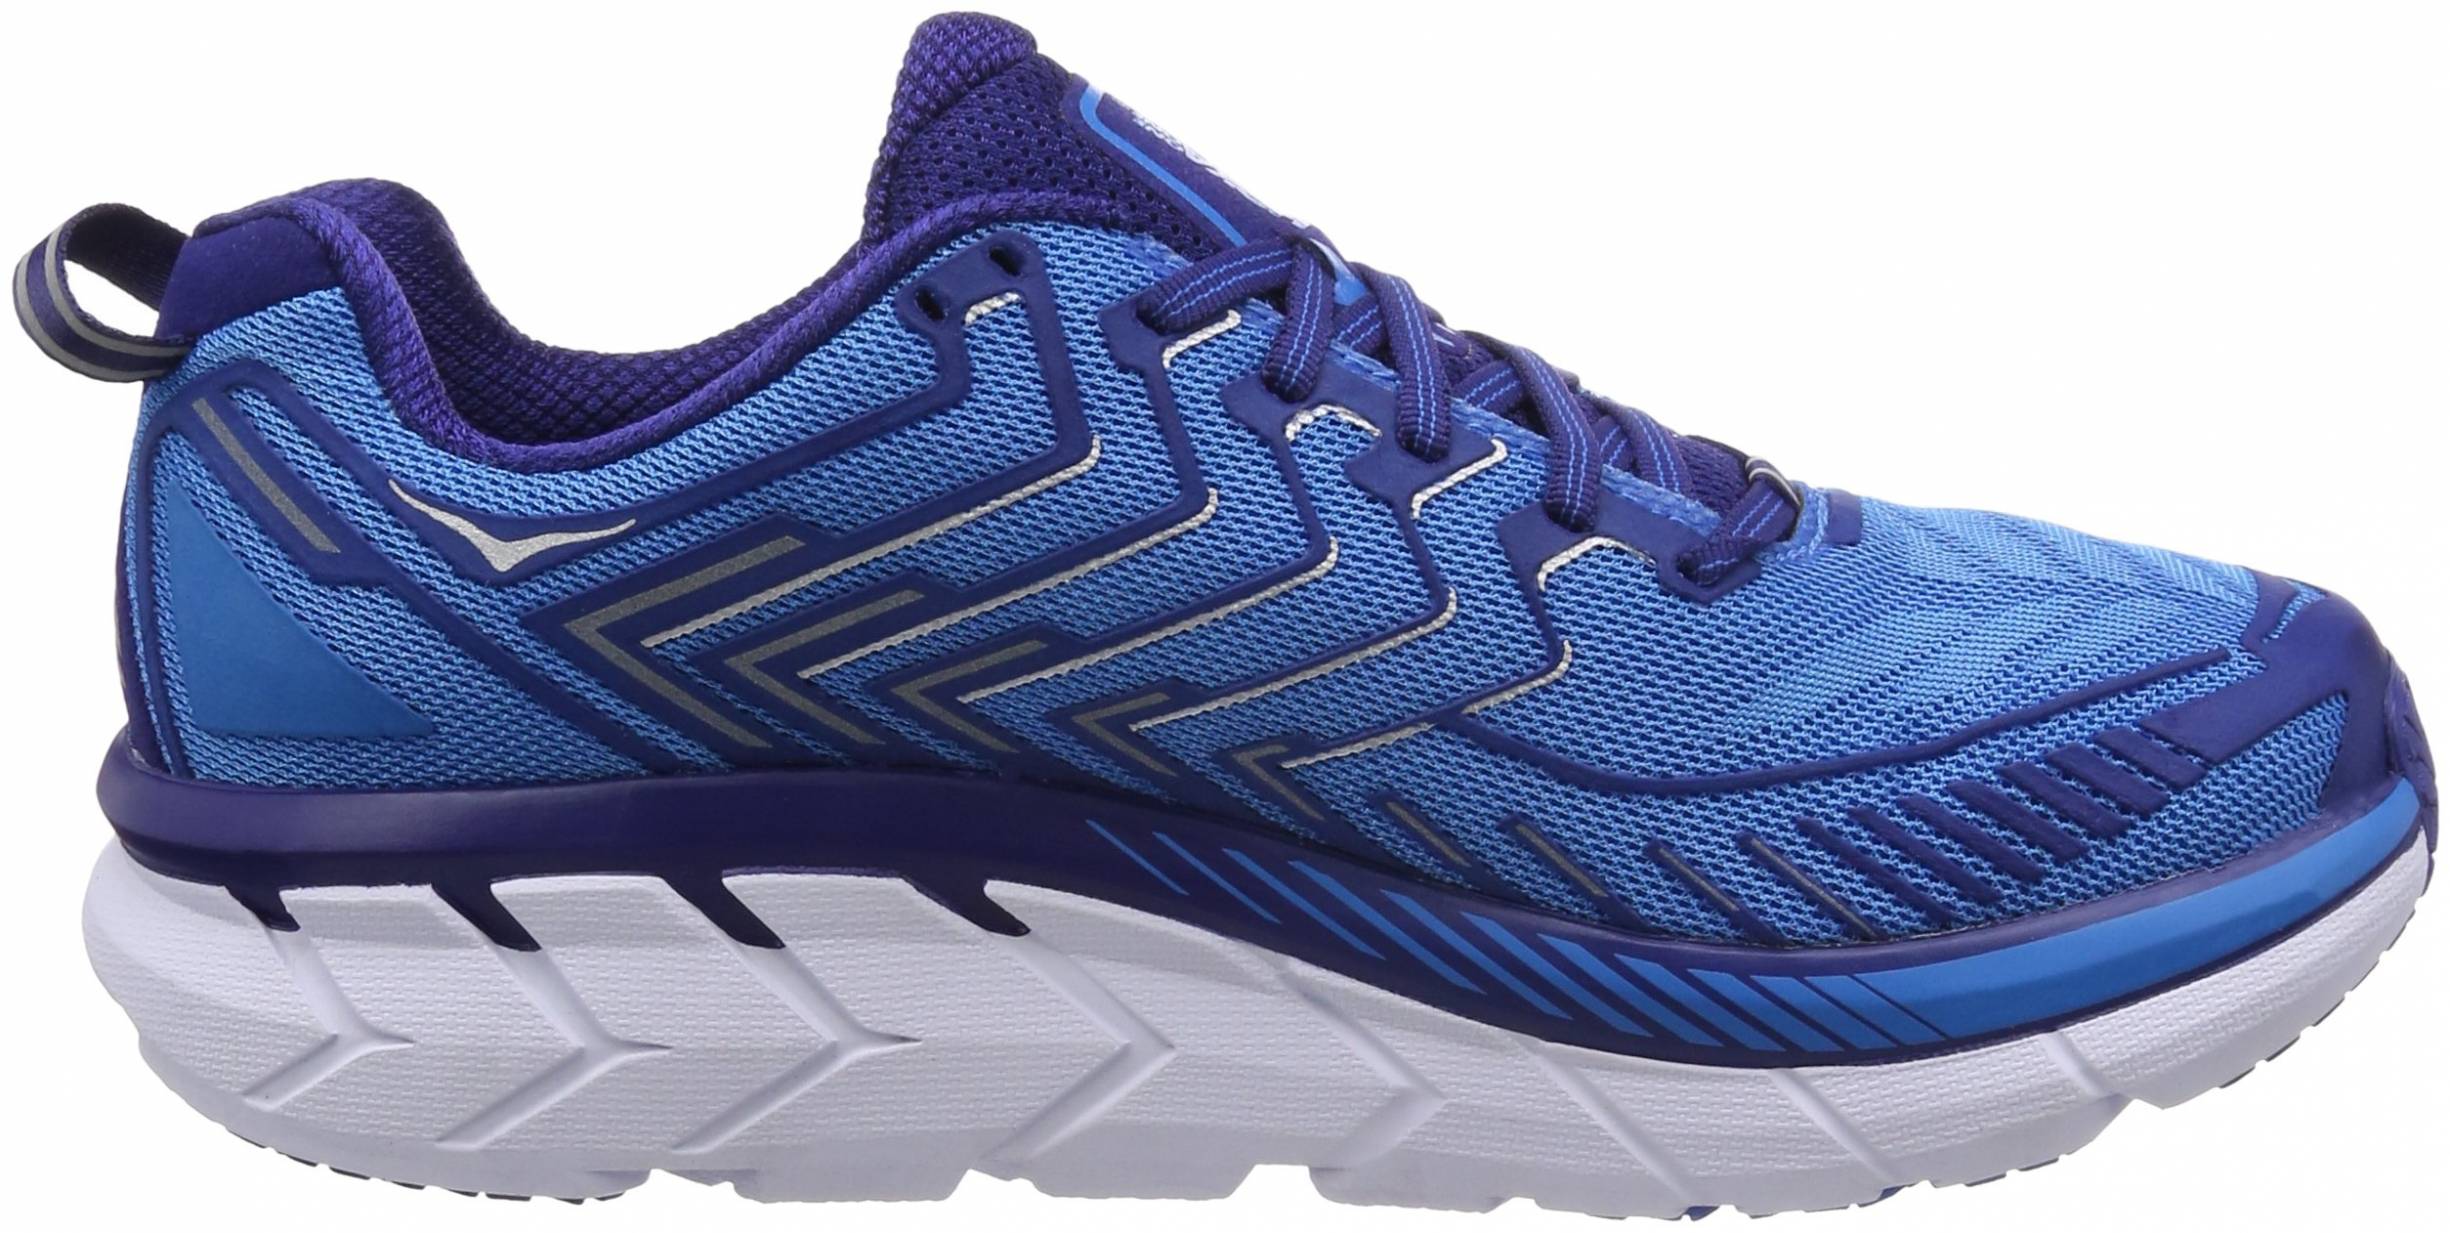 $199 + Review of Hoka One One Clifton 4 